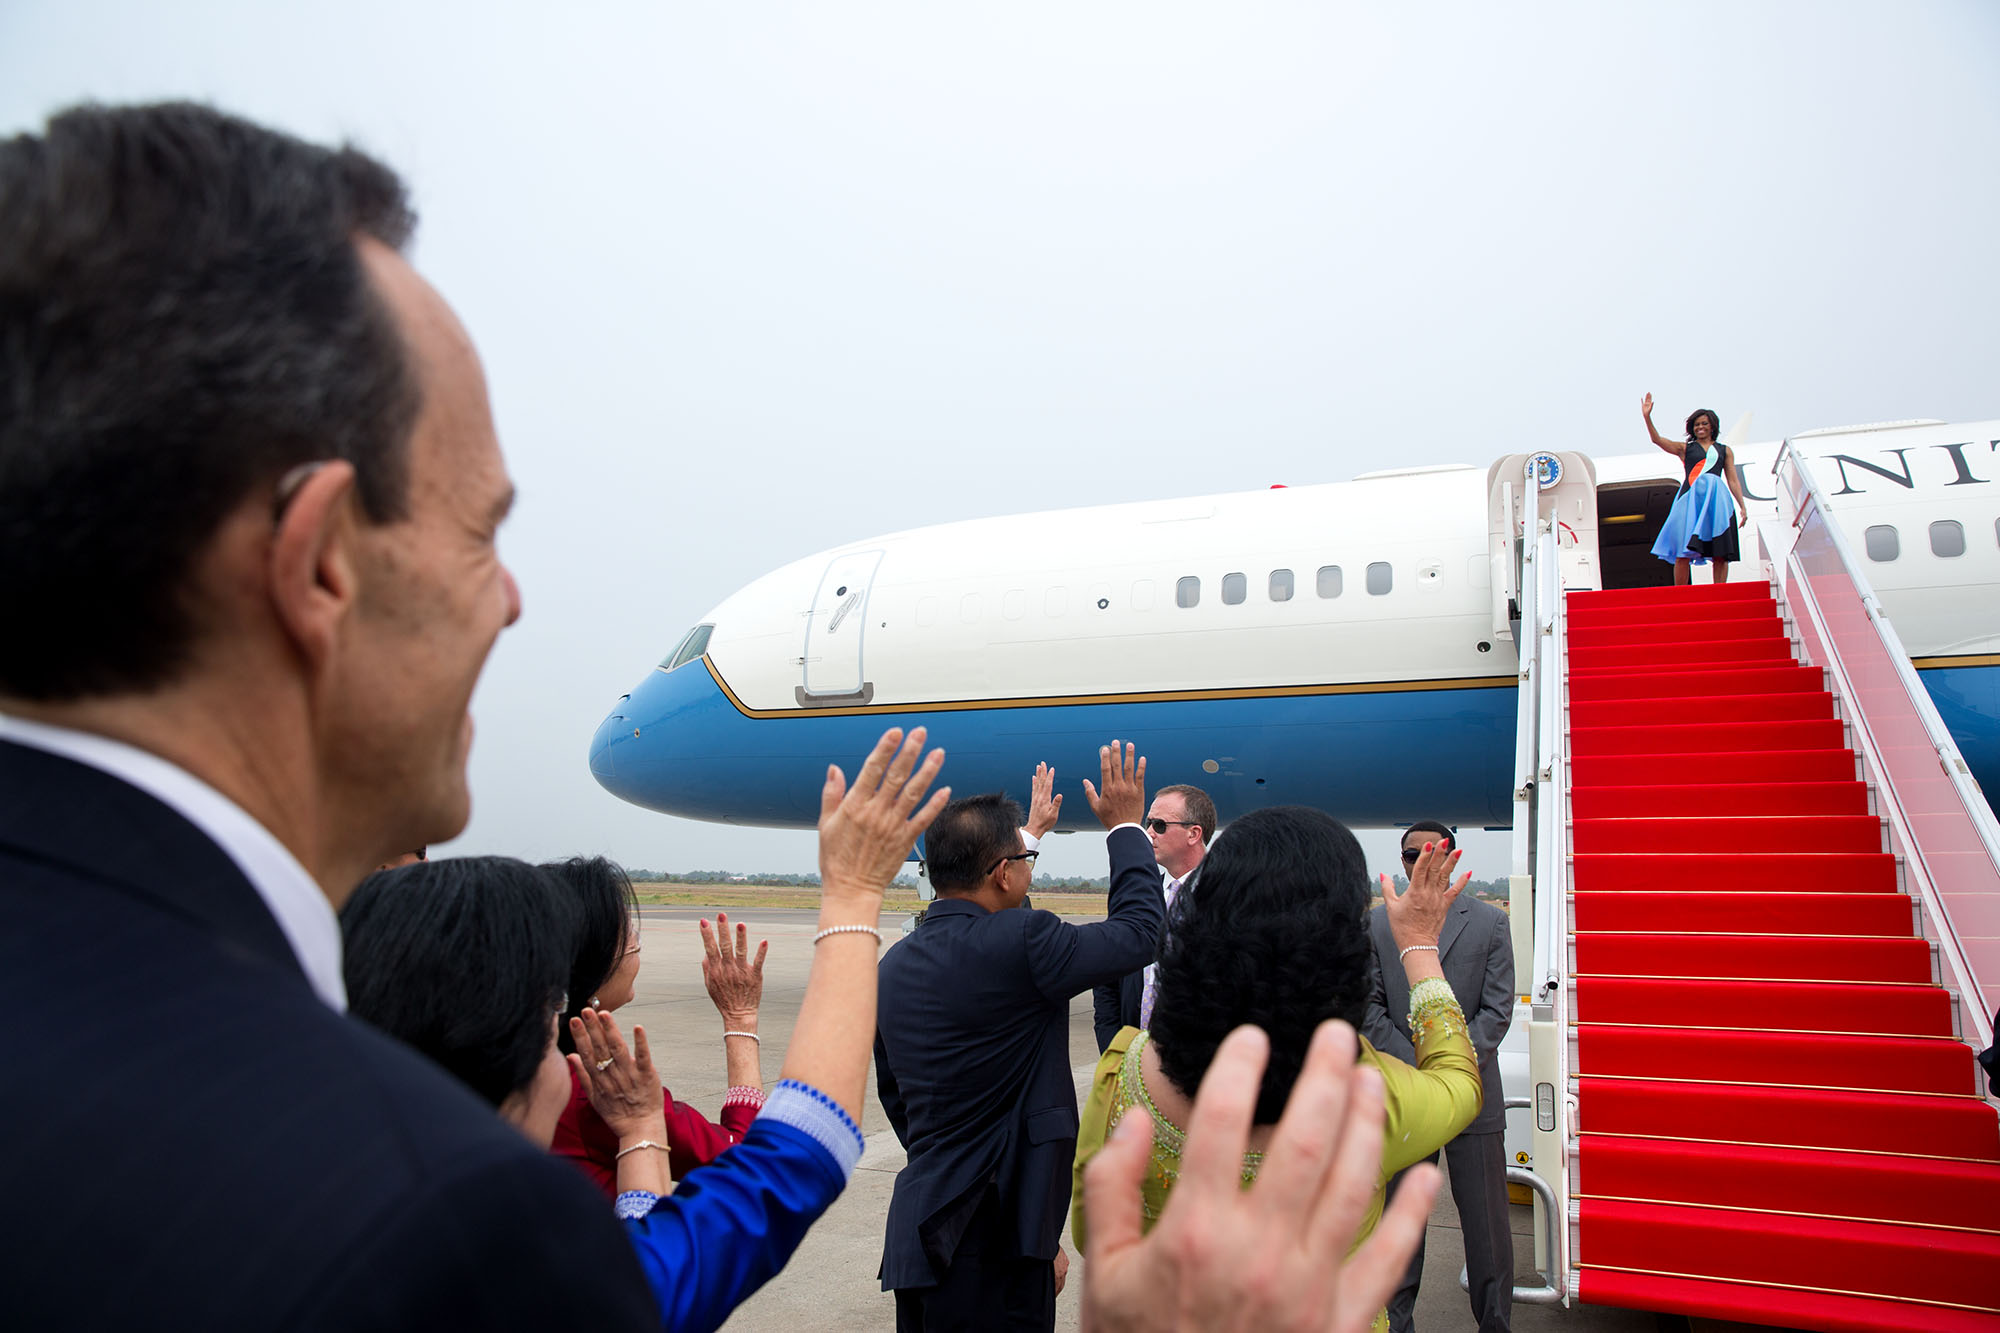 The First Lady waves prior to departure from Siem Reap, Cambodia. (Official White House Photo by Amanda Lucidon)